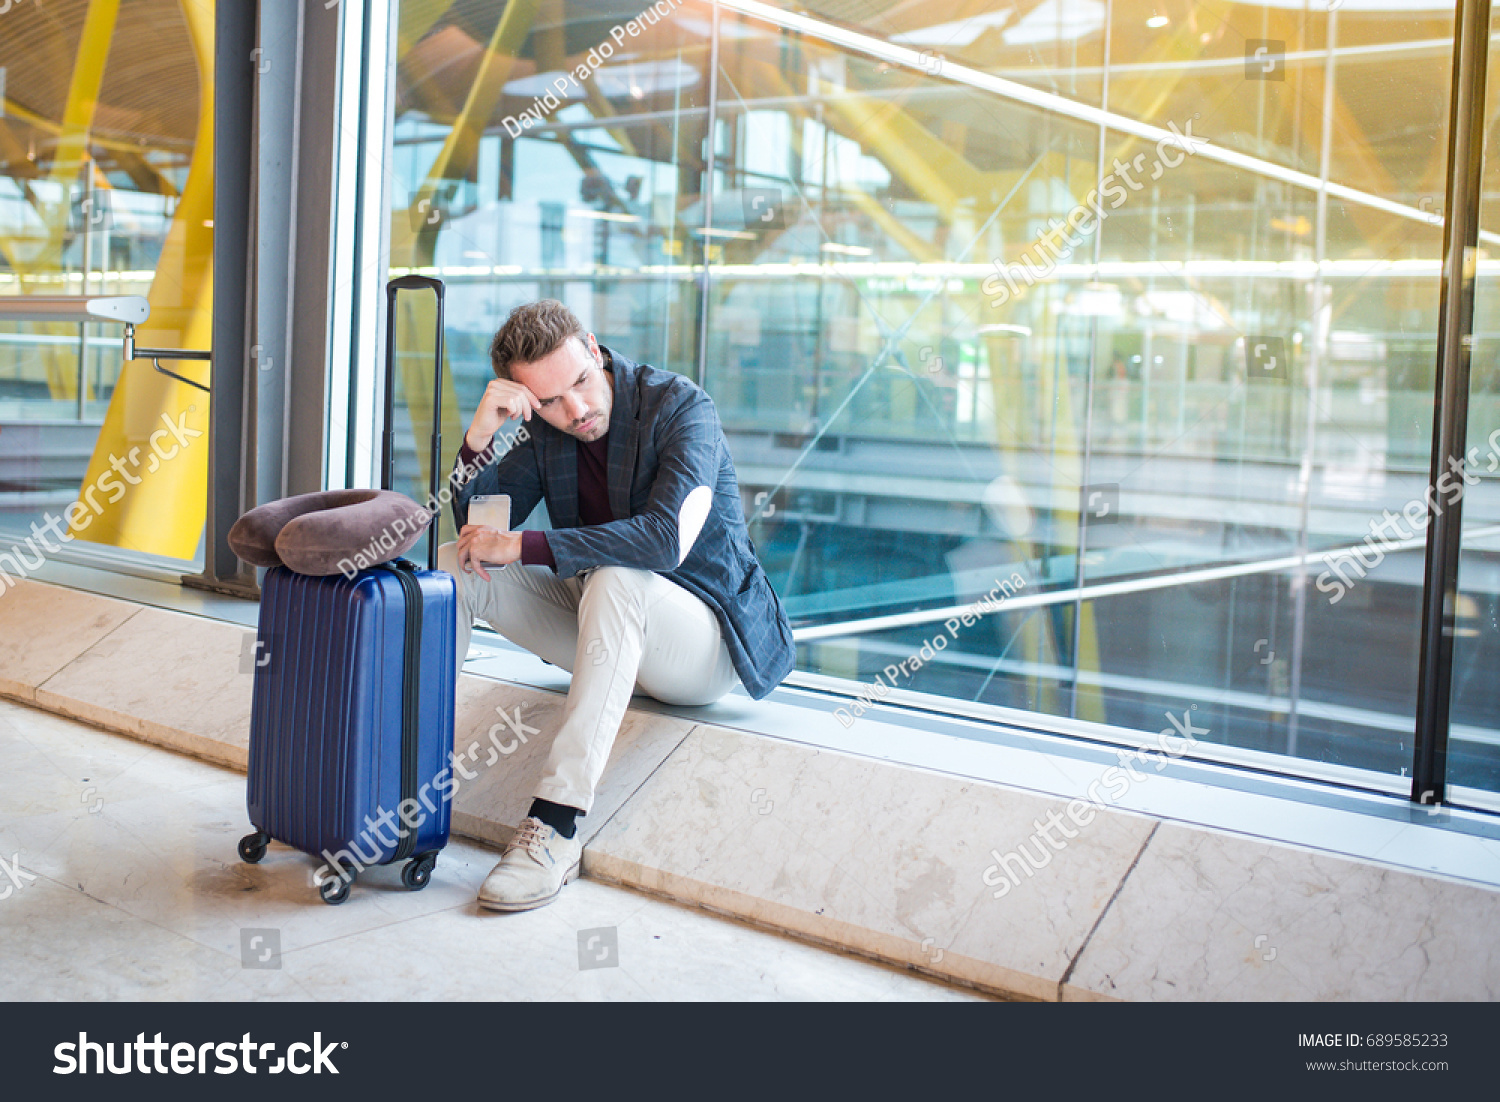 Man upset at the airport his flight is delayed #689585233